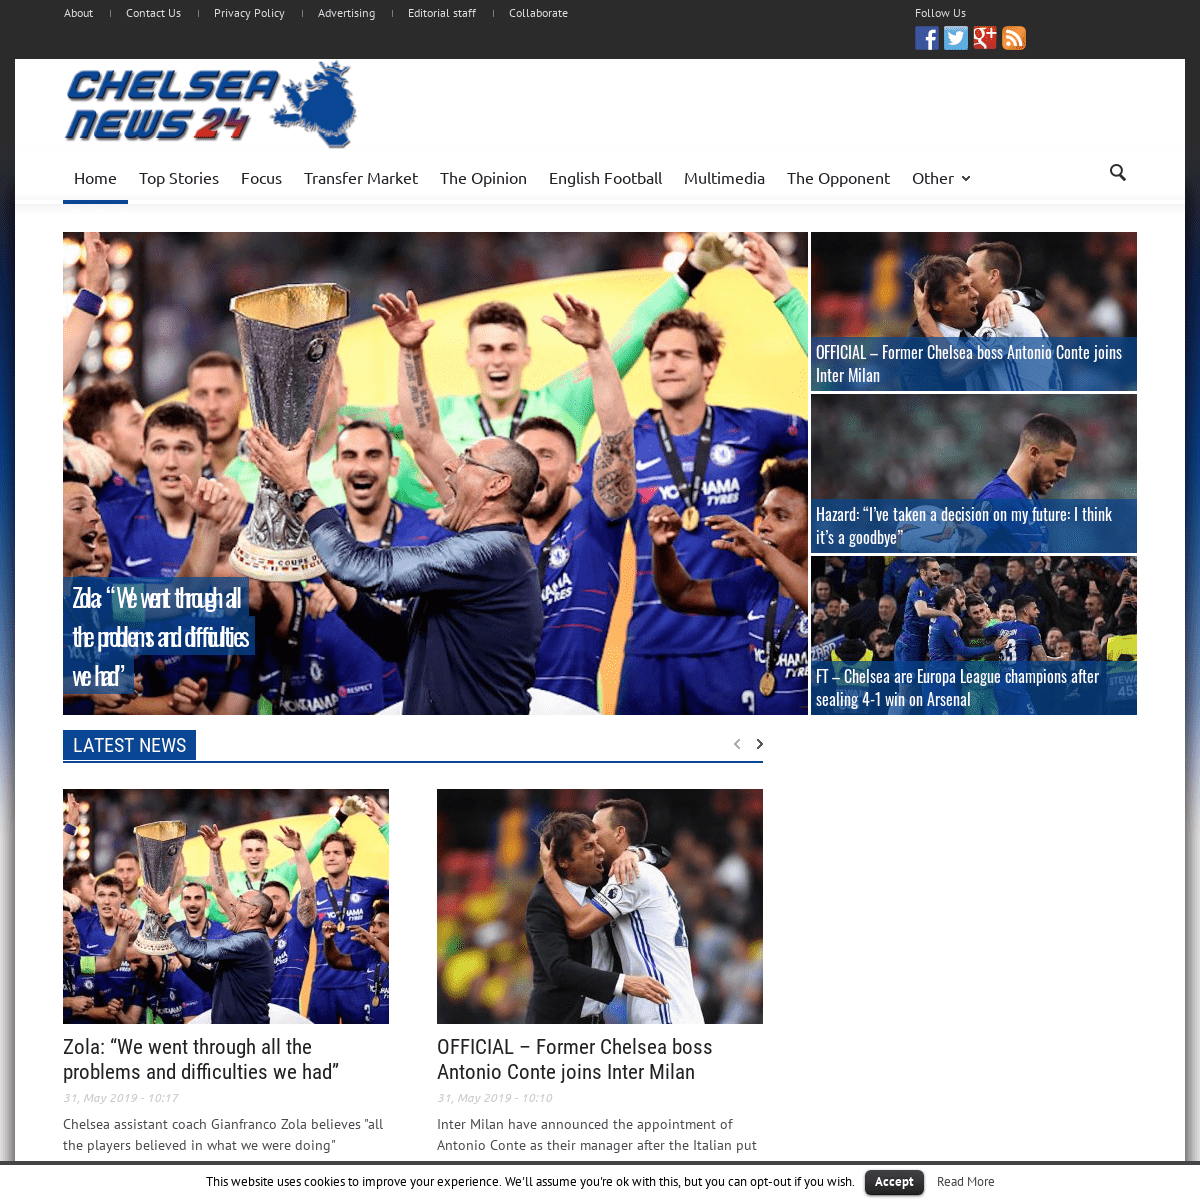 A complete backup of chelseanews24.com